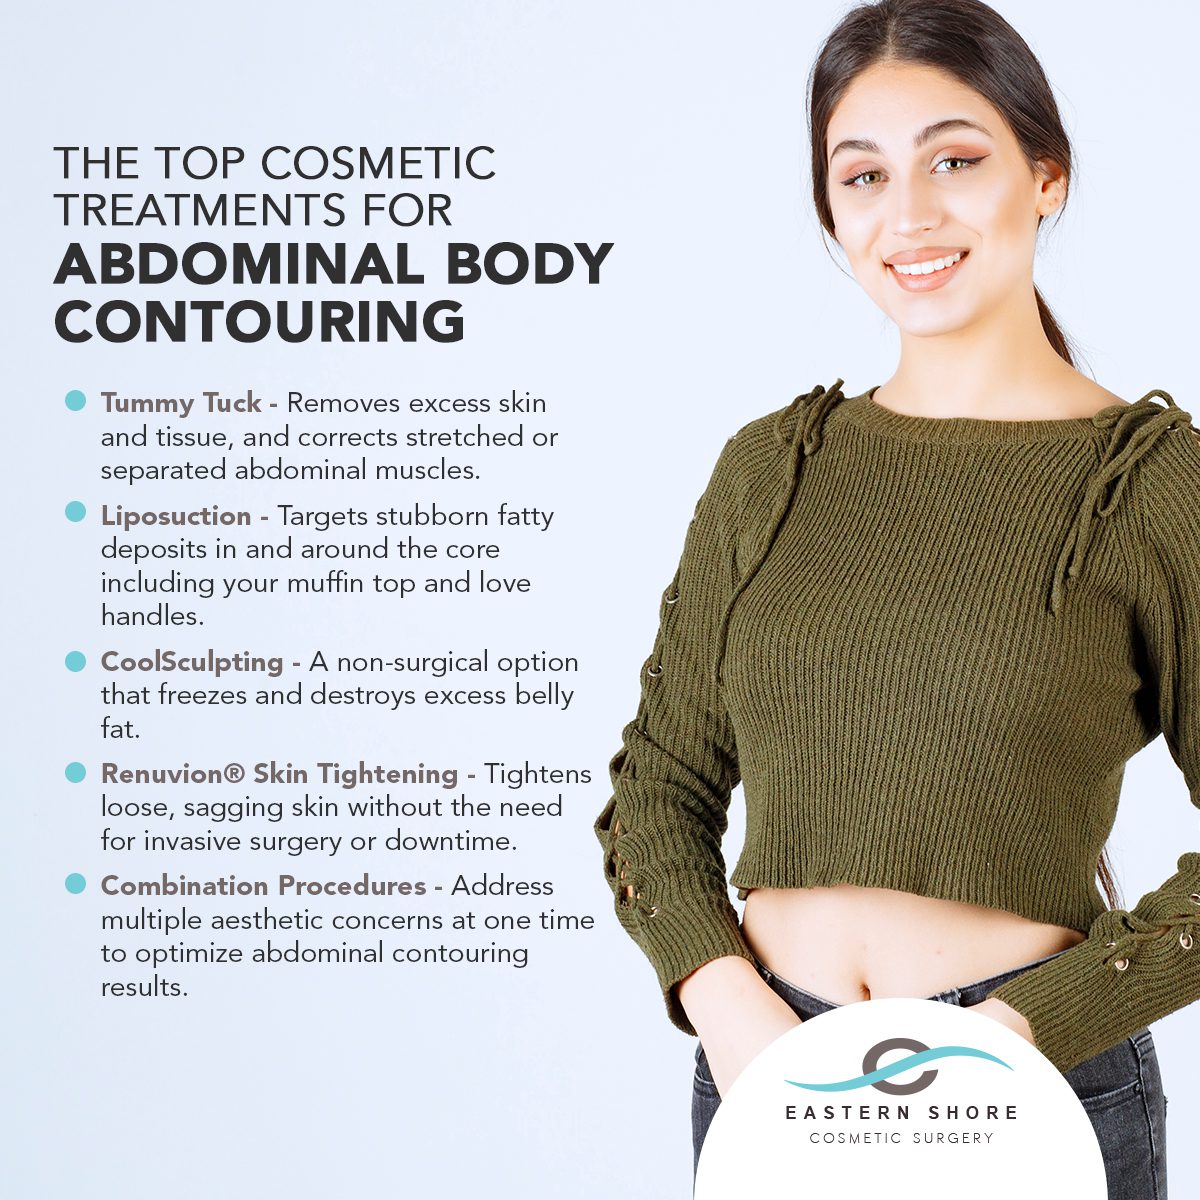 The Top Cosmetic Treatments for Abdominal Body Contouring